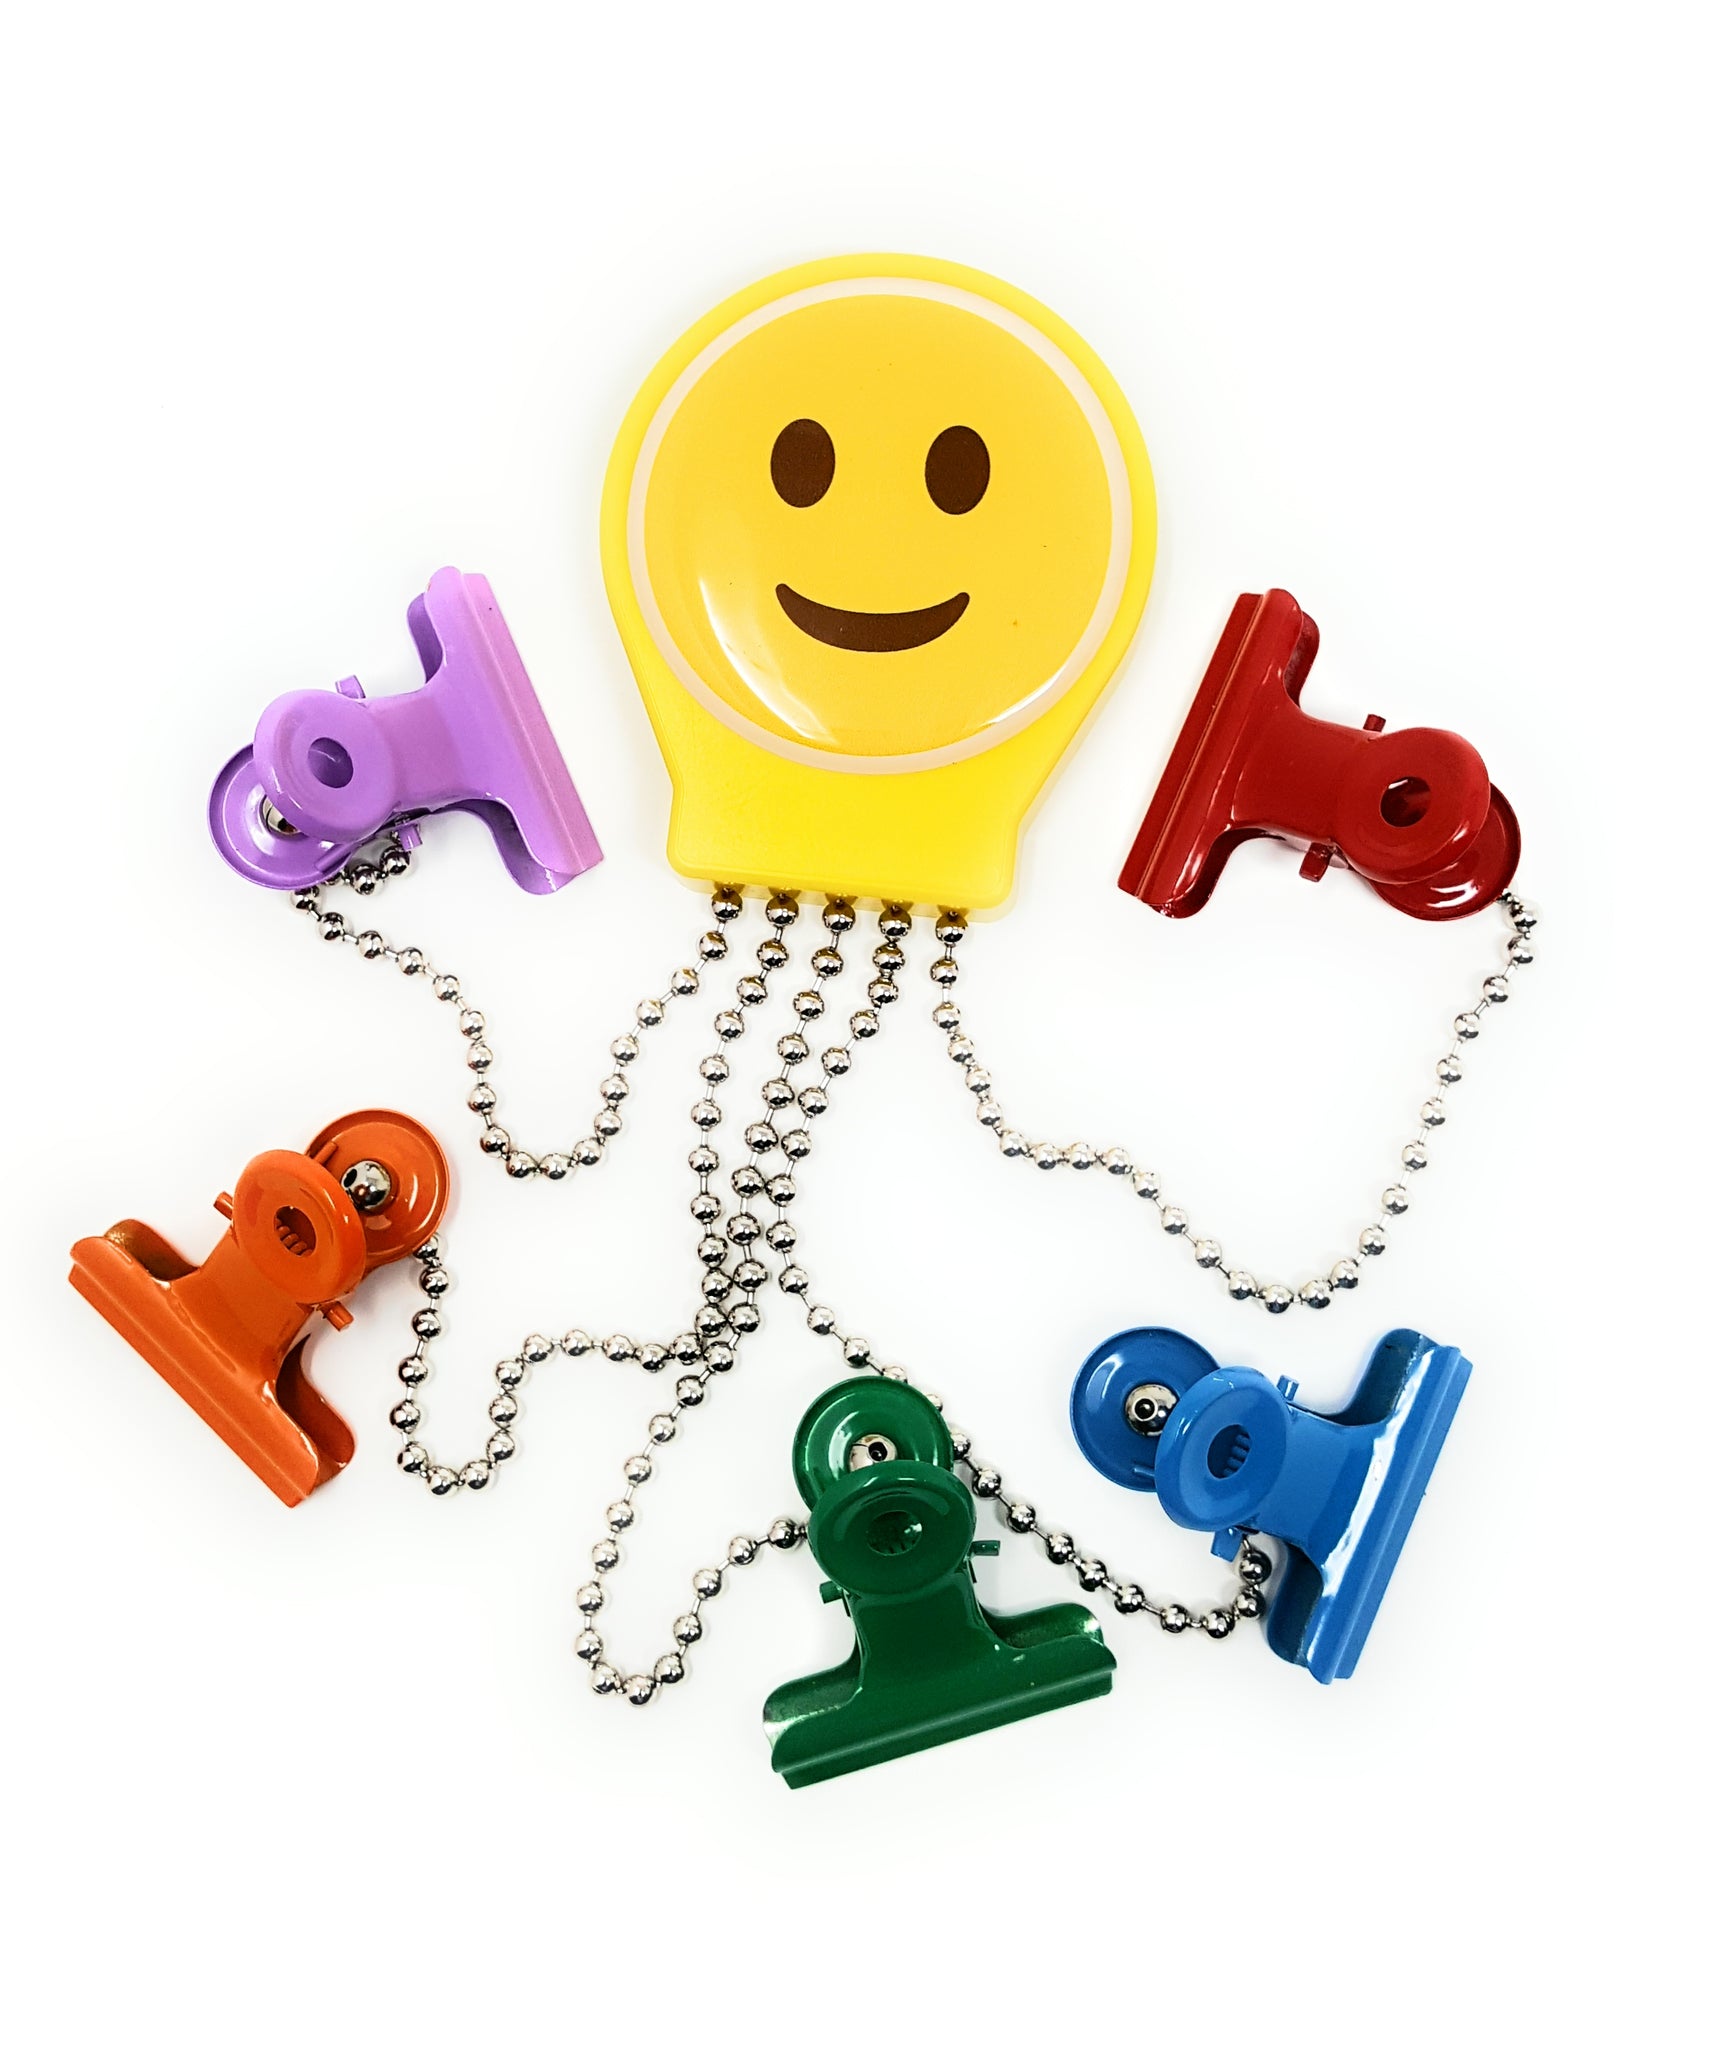 OctoClip Refrigerator Magnet – Smile Emoji with Multi Colored Clips